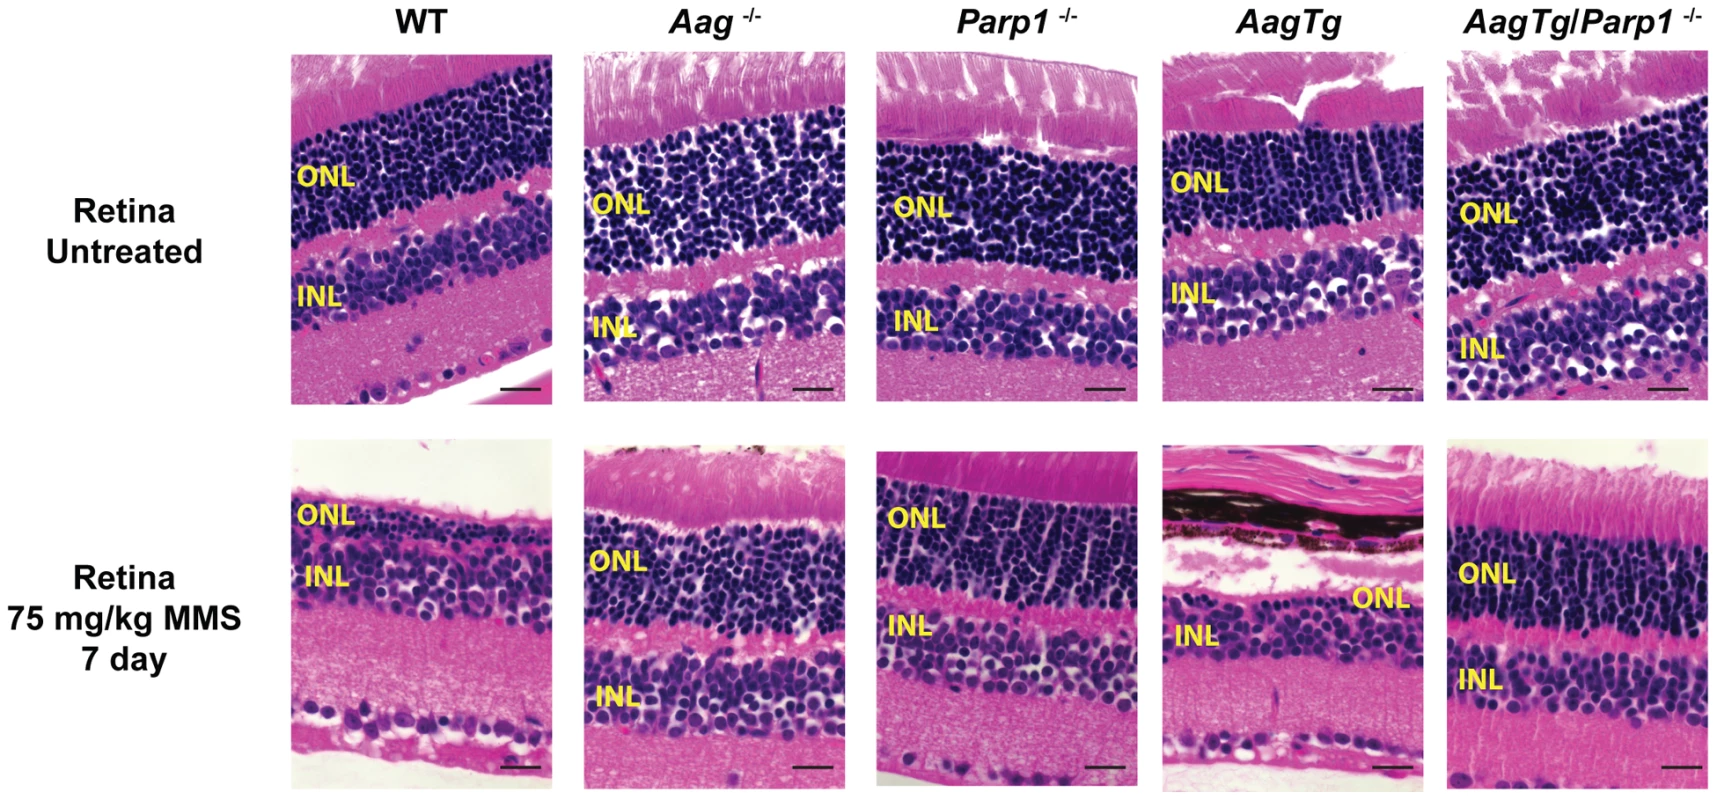 Parp1 deficiency protects against Aag-dependent, MMS-induced toxicity in retina photoreceptors.